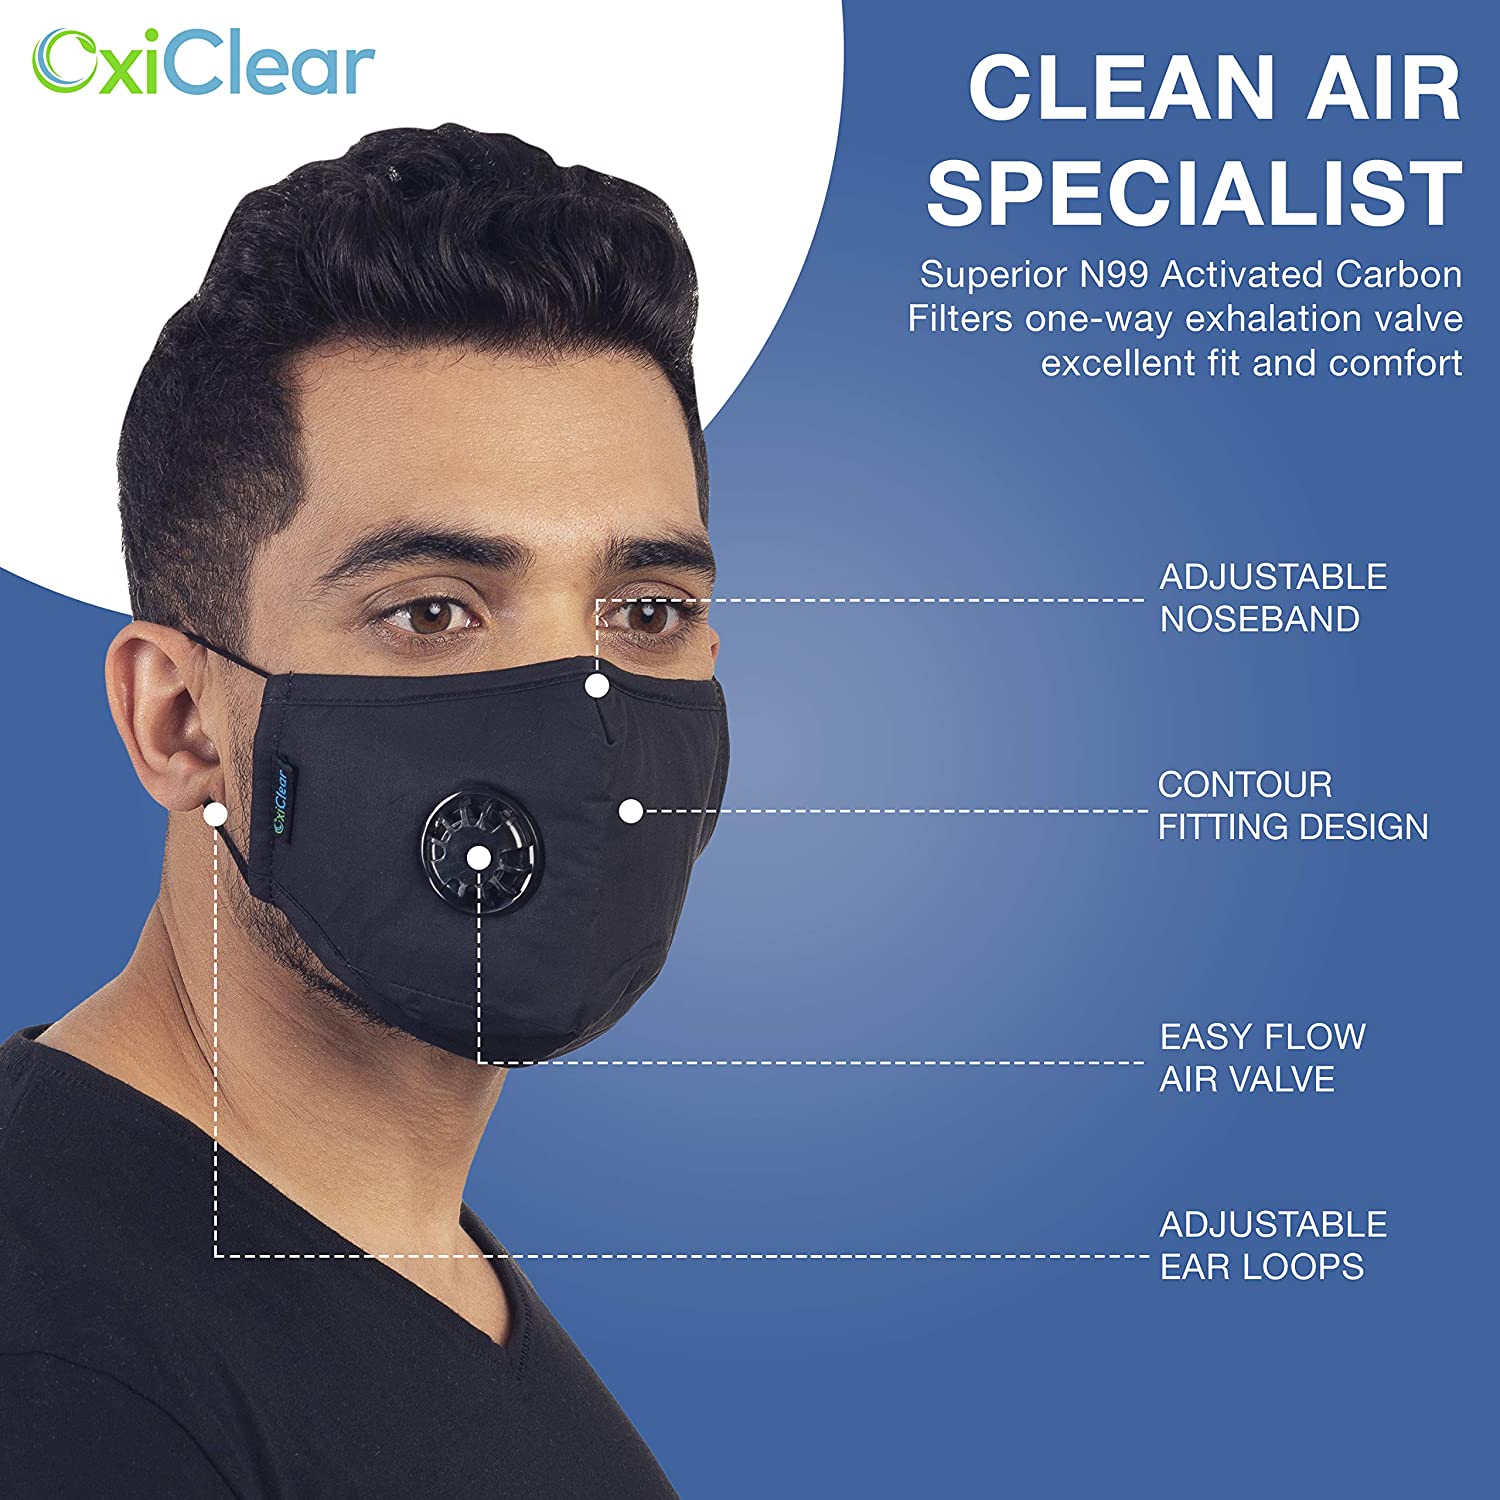 OxiClear N99 Pollution Mask With Carbon Filters Reusable D.R.D.O Certified (Multicolour Dark - Pack of 3)